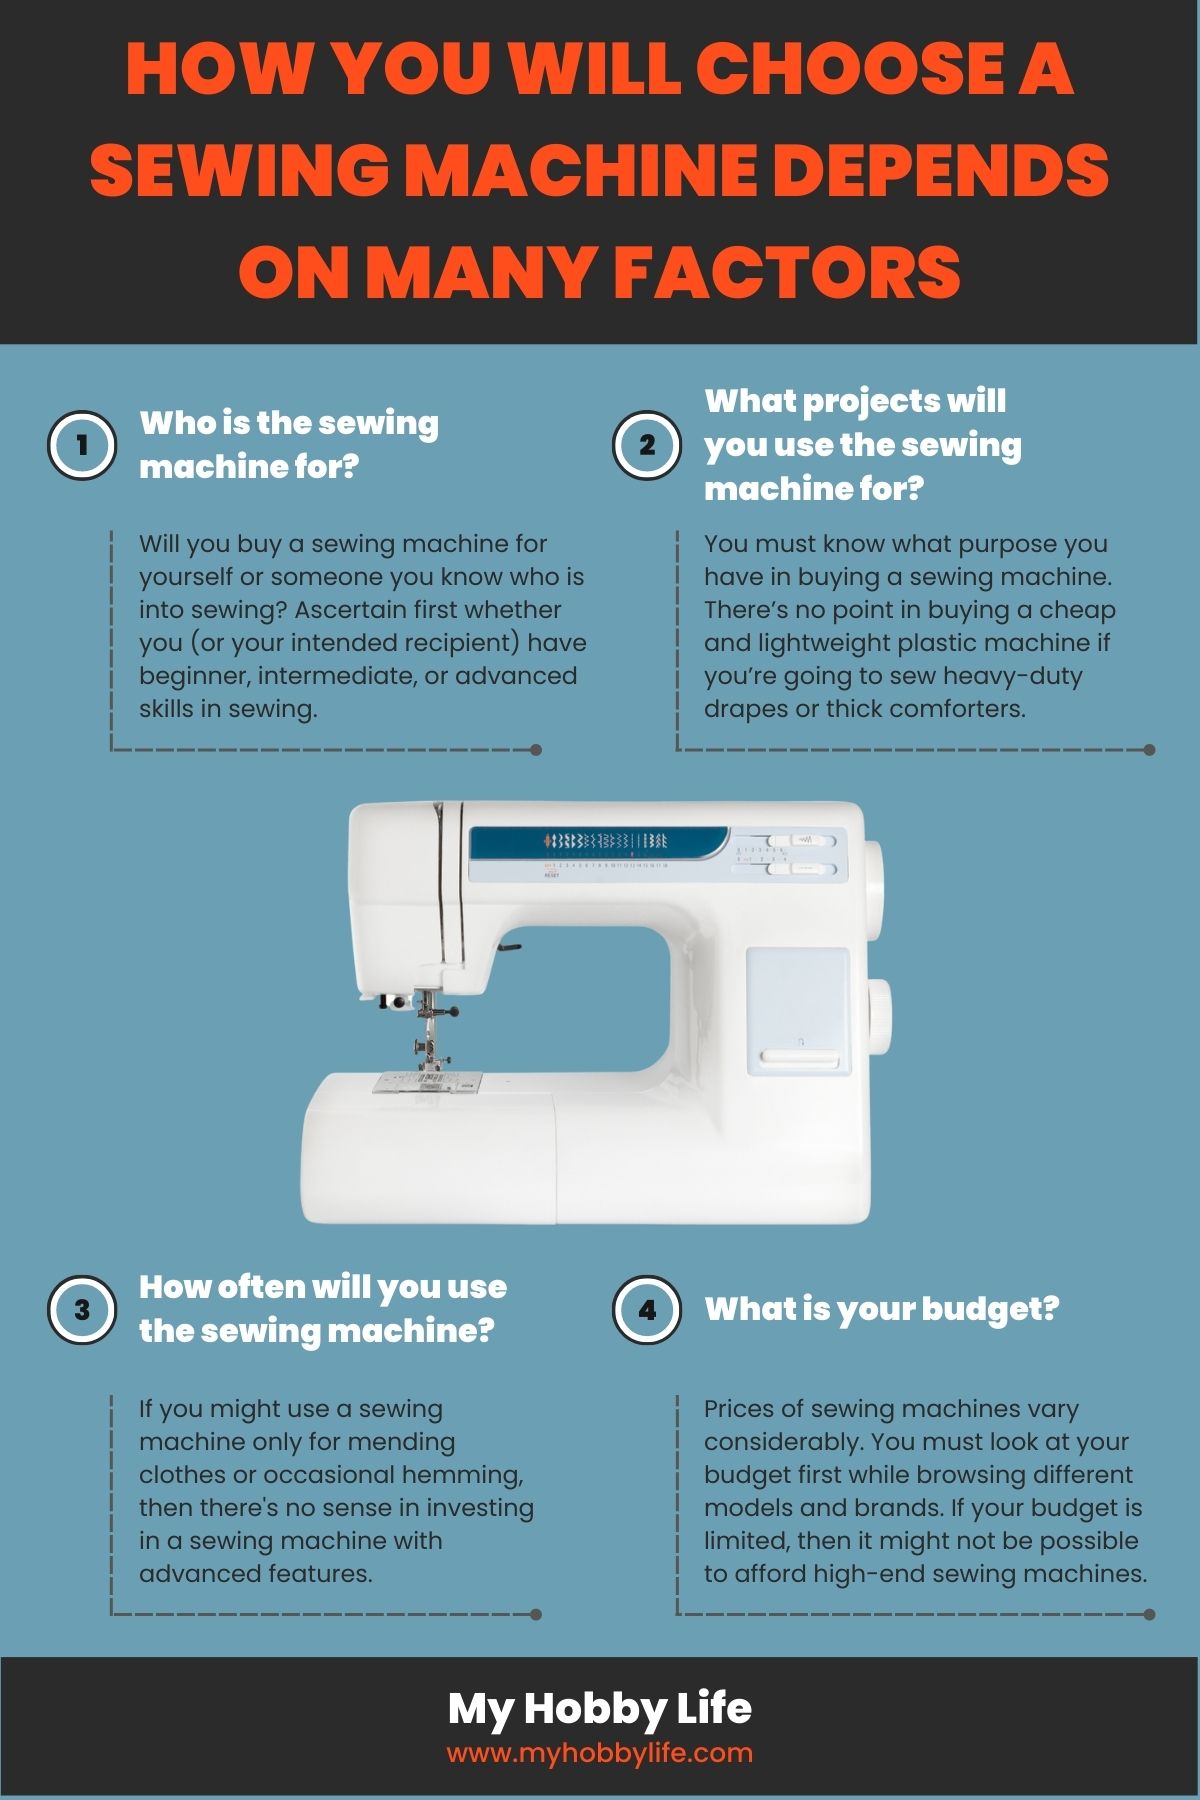 How you will choose a sewing machine depends on many factors